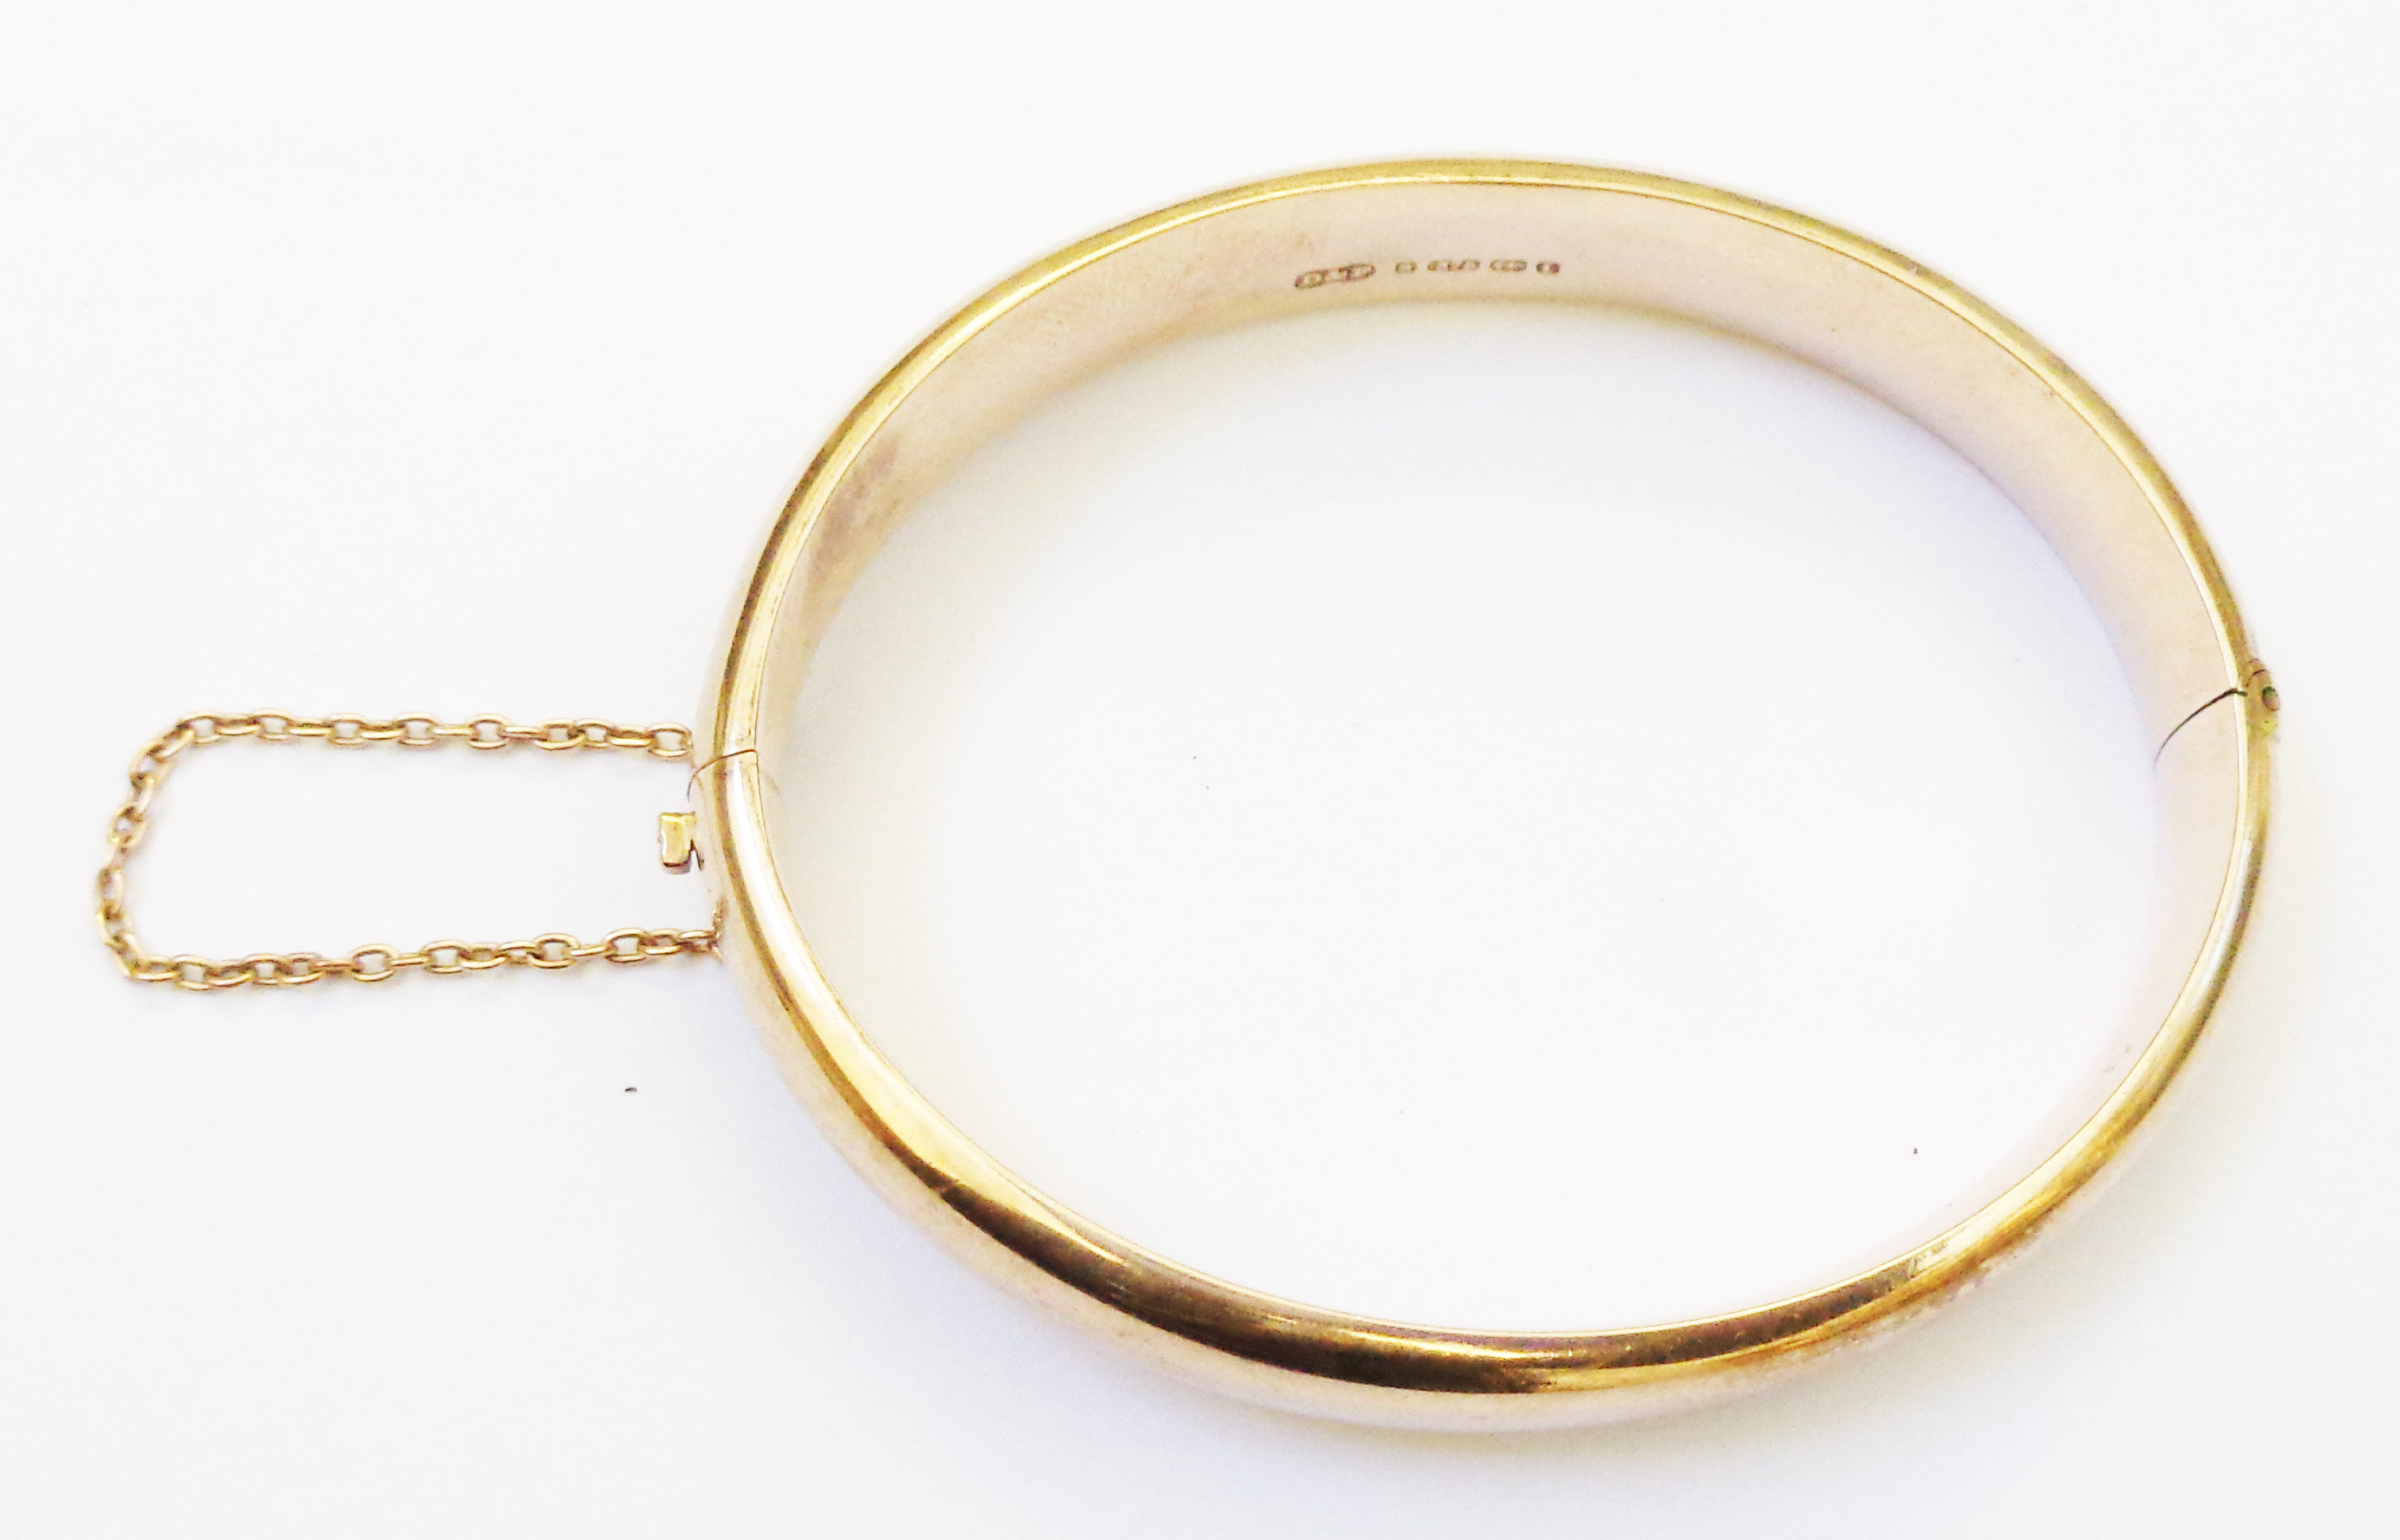 A 9ct. gold clasp bangle with safety chain - Birmingham